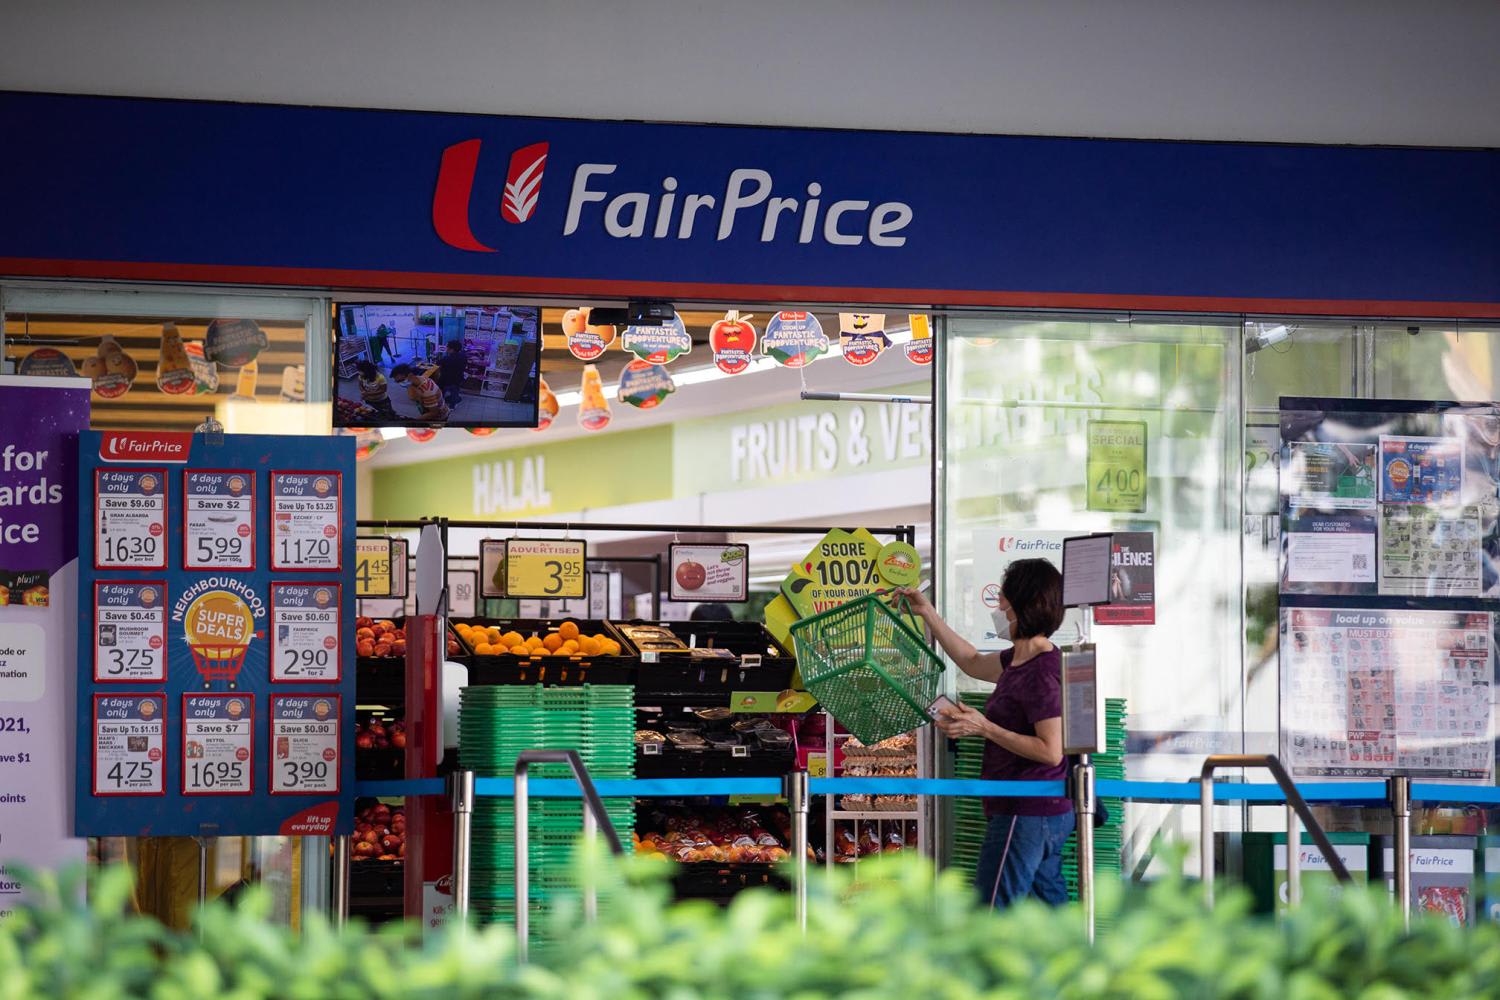 Items at NTUC FairPrice supermarkets that will be sold with a 1 per cent discount will include fresh fruits, vegetables, meats and household cleaners.